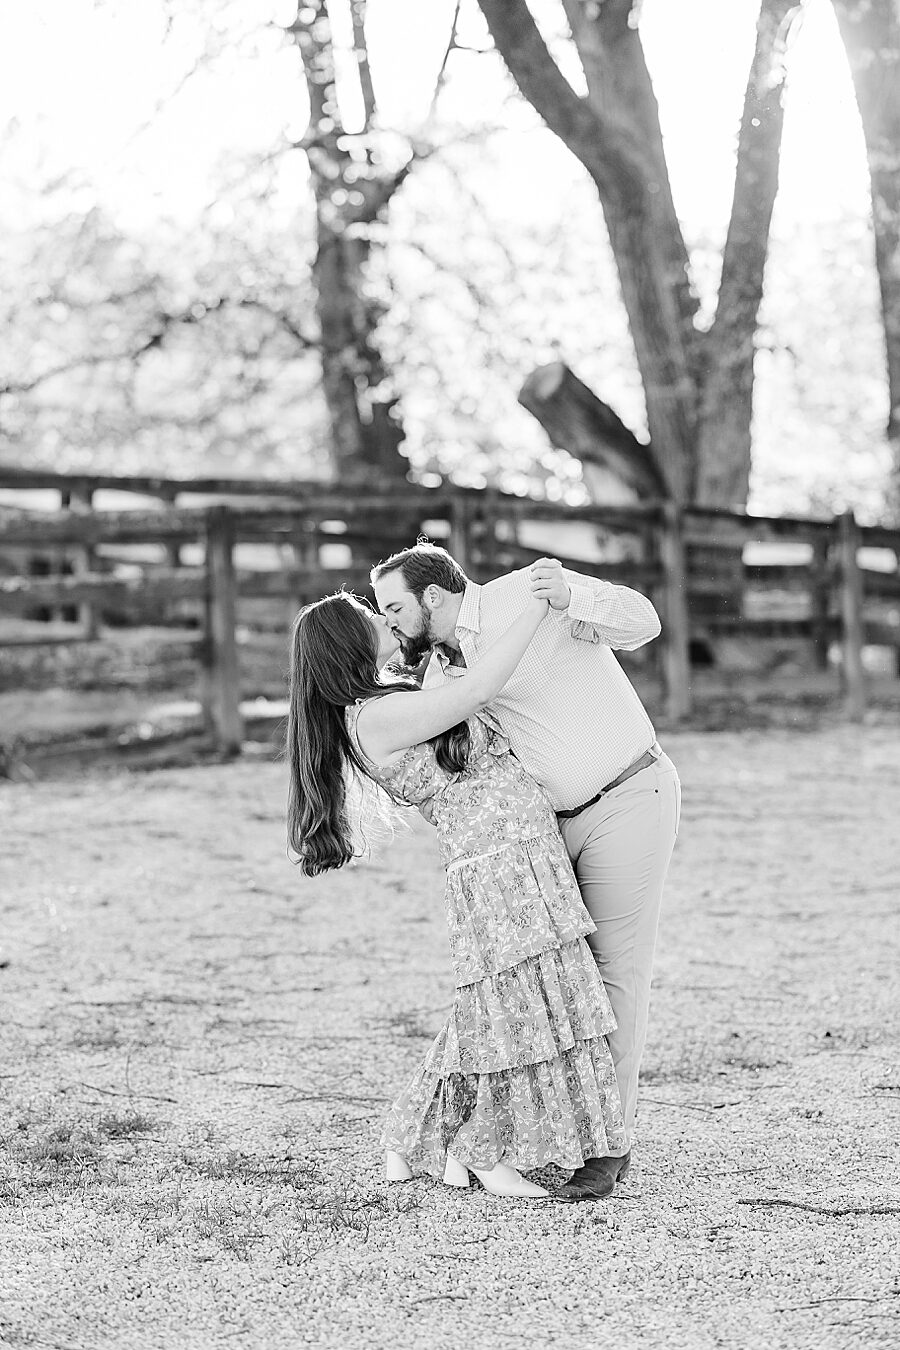 Leaning in for a kiss during session by Amanda May Photos